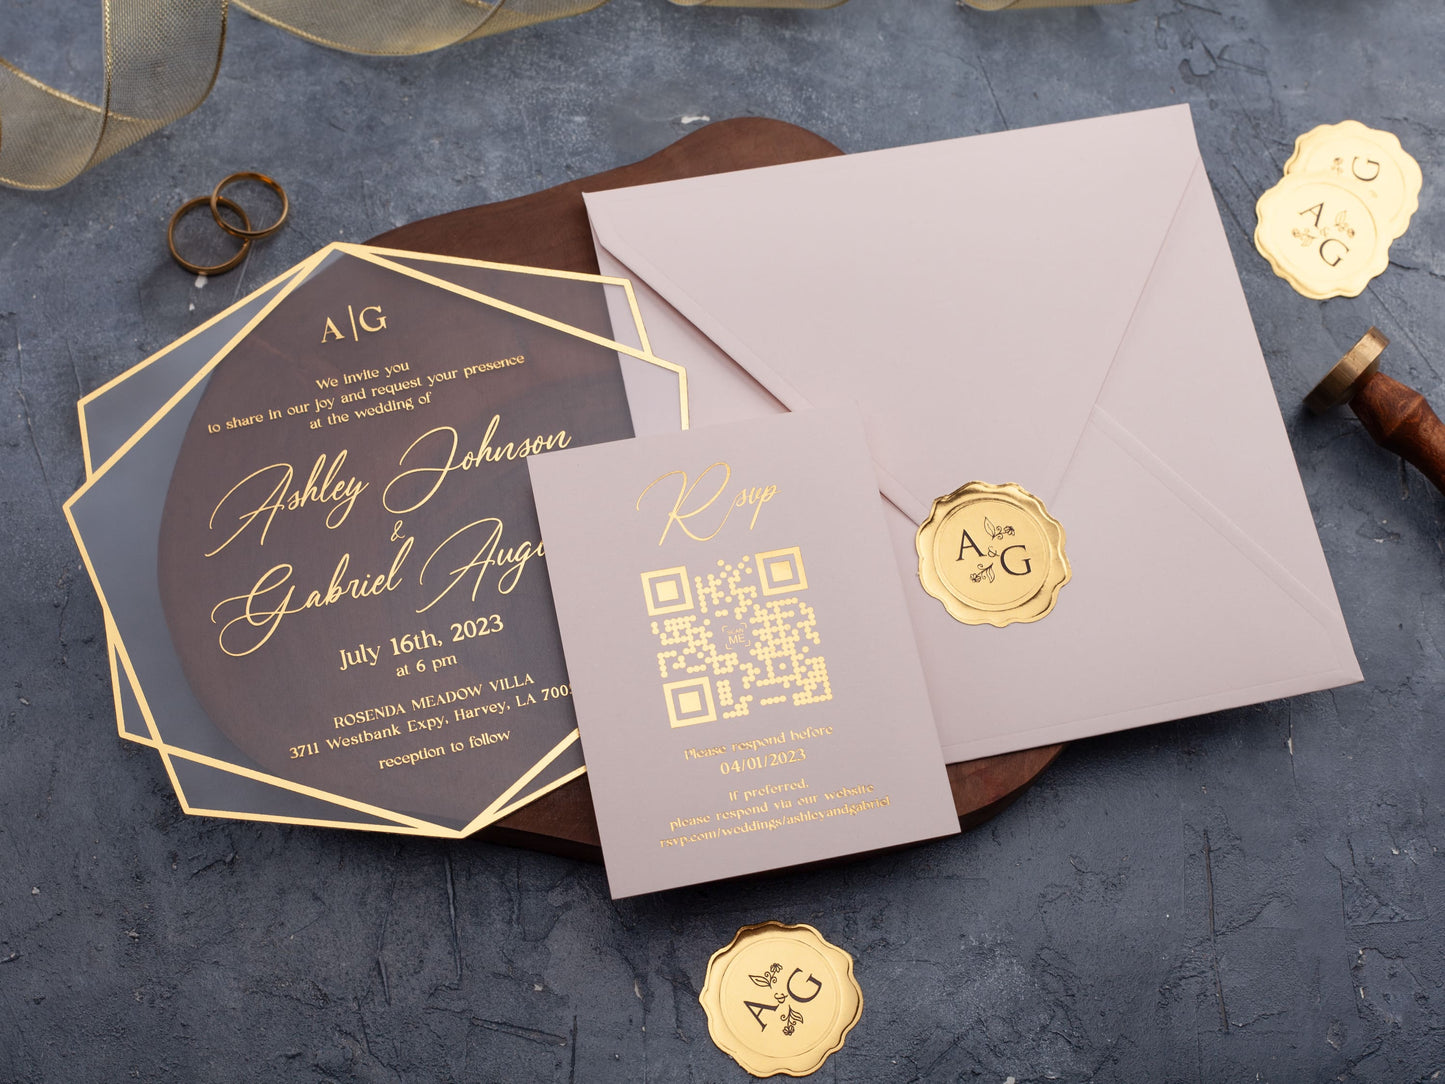 Acrylic Wedding Invitation with Blush Pink Envelope and Gold Foil